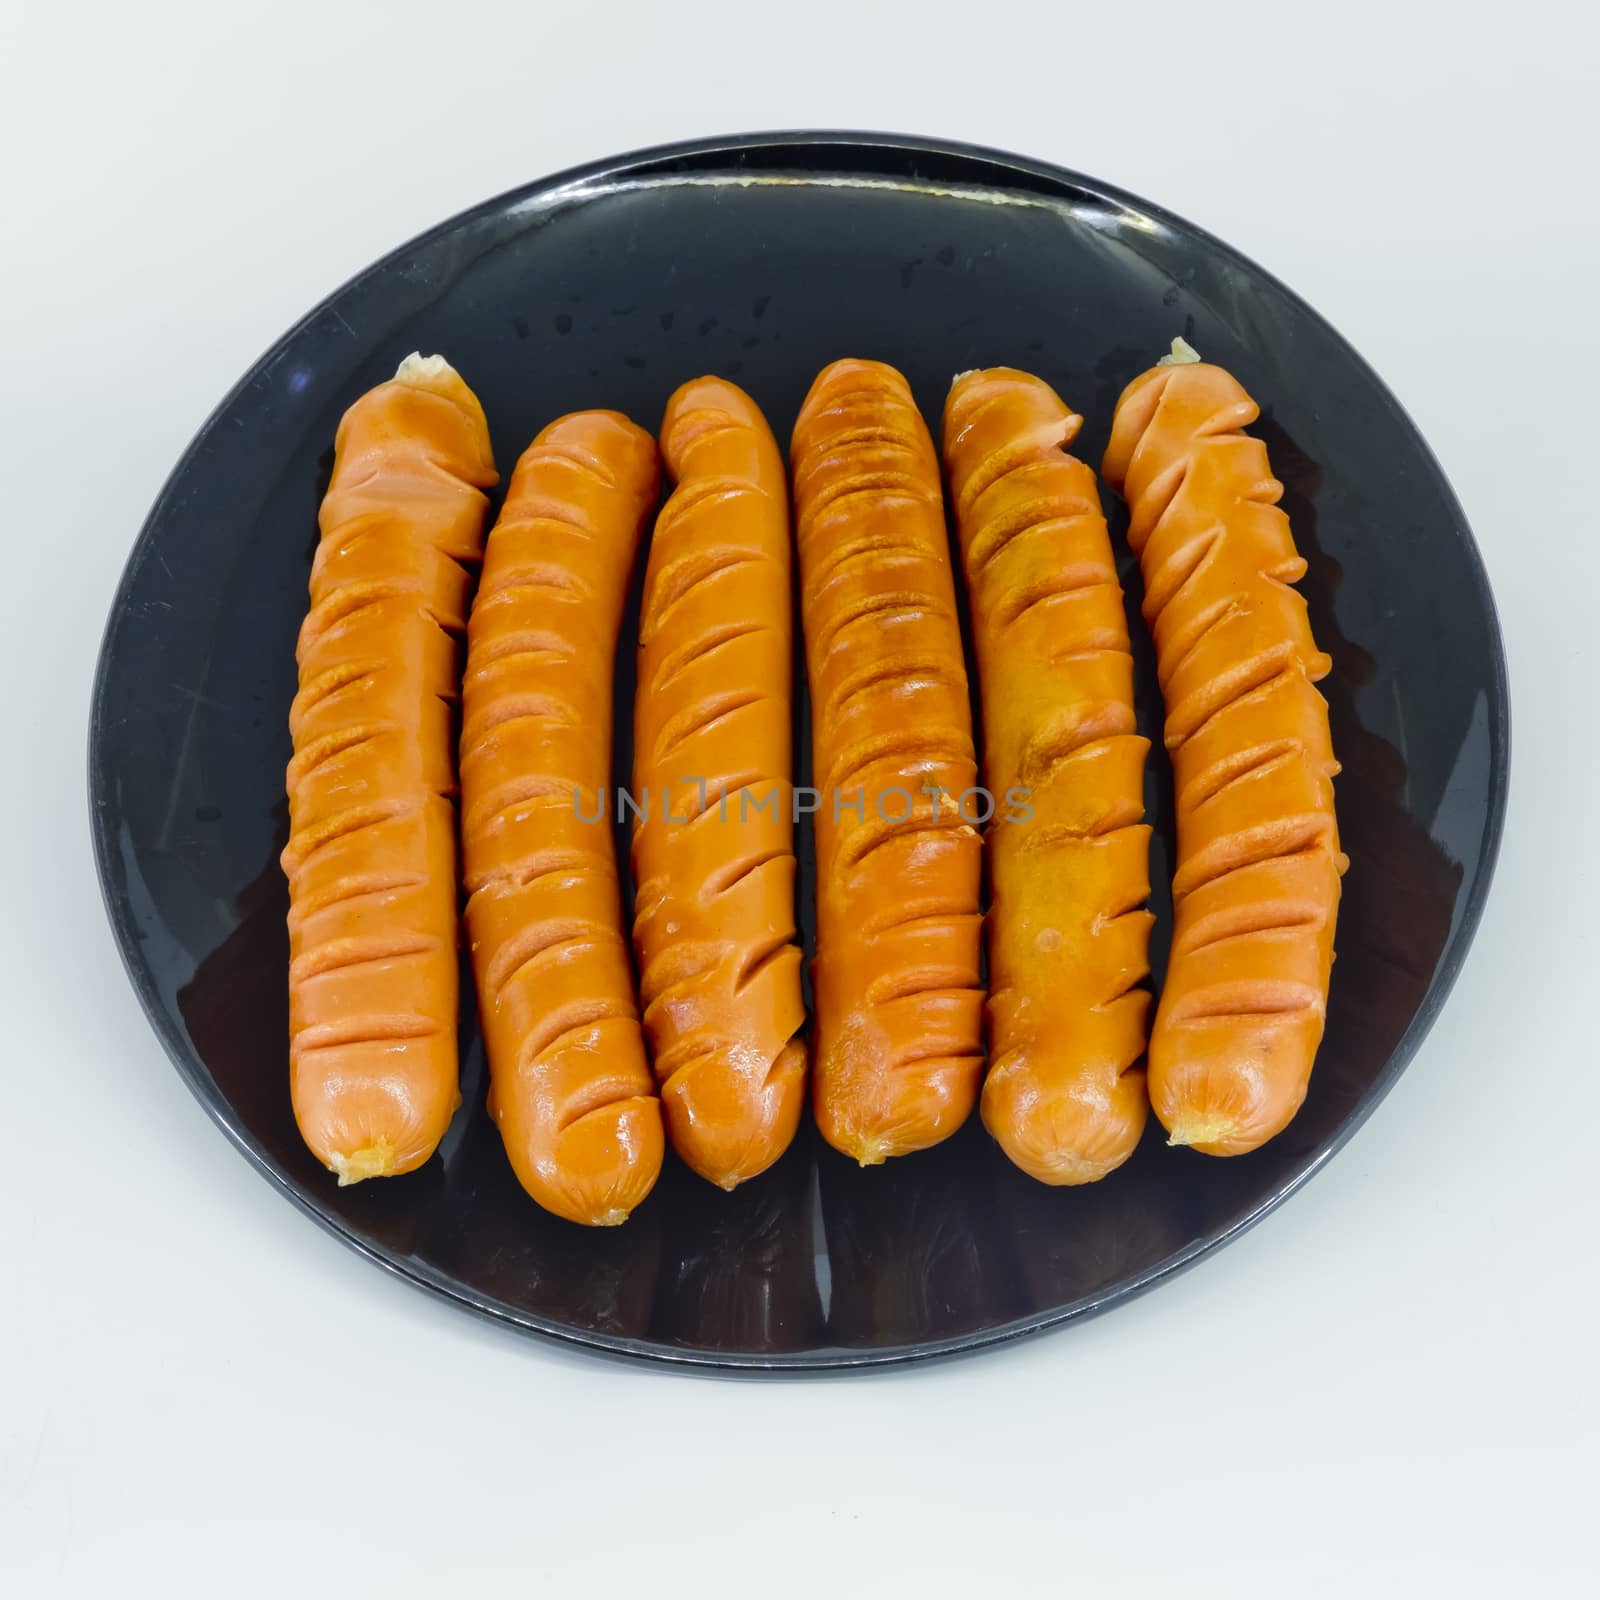 roast sausages on black dish by art9858